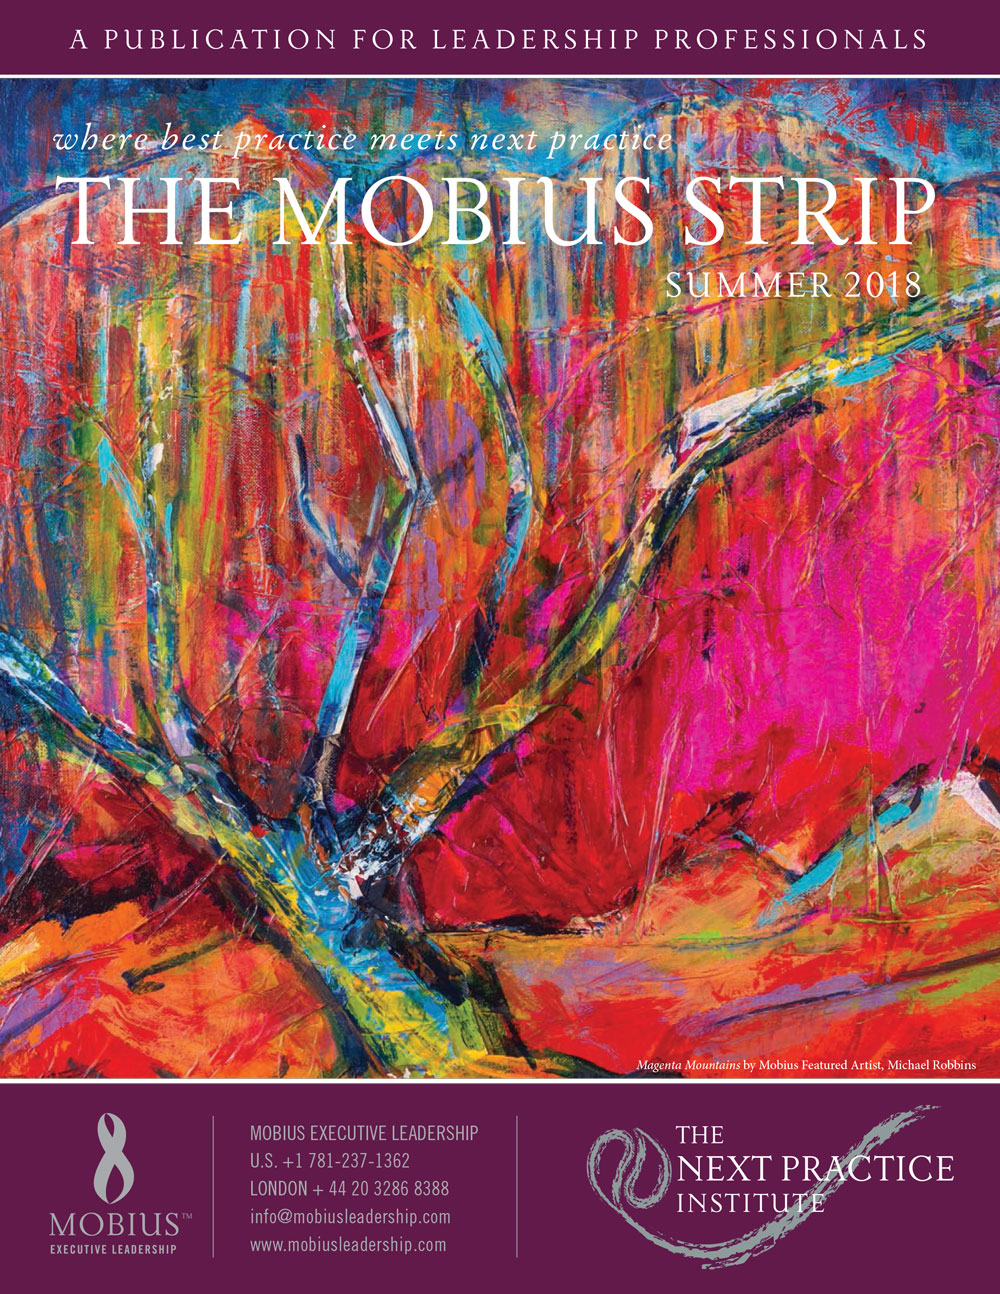 The Mobius Strip Summer 2018